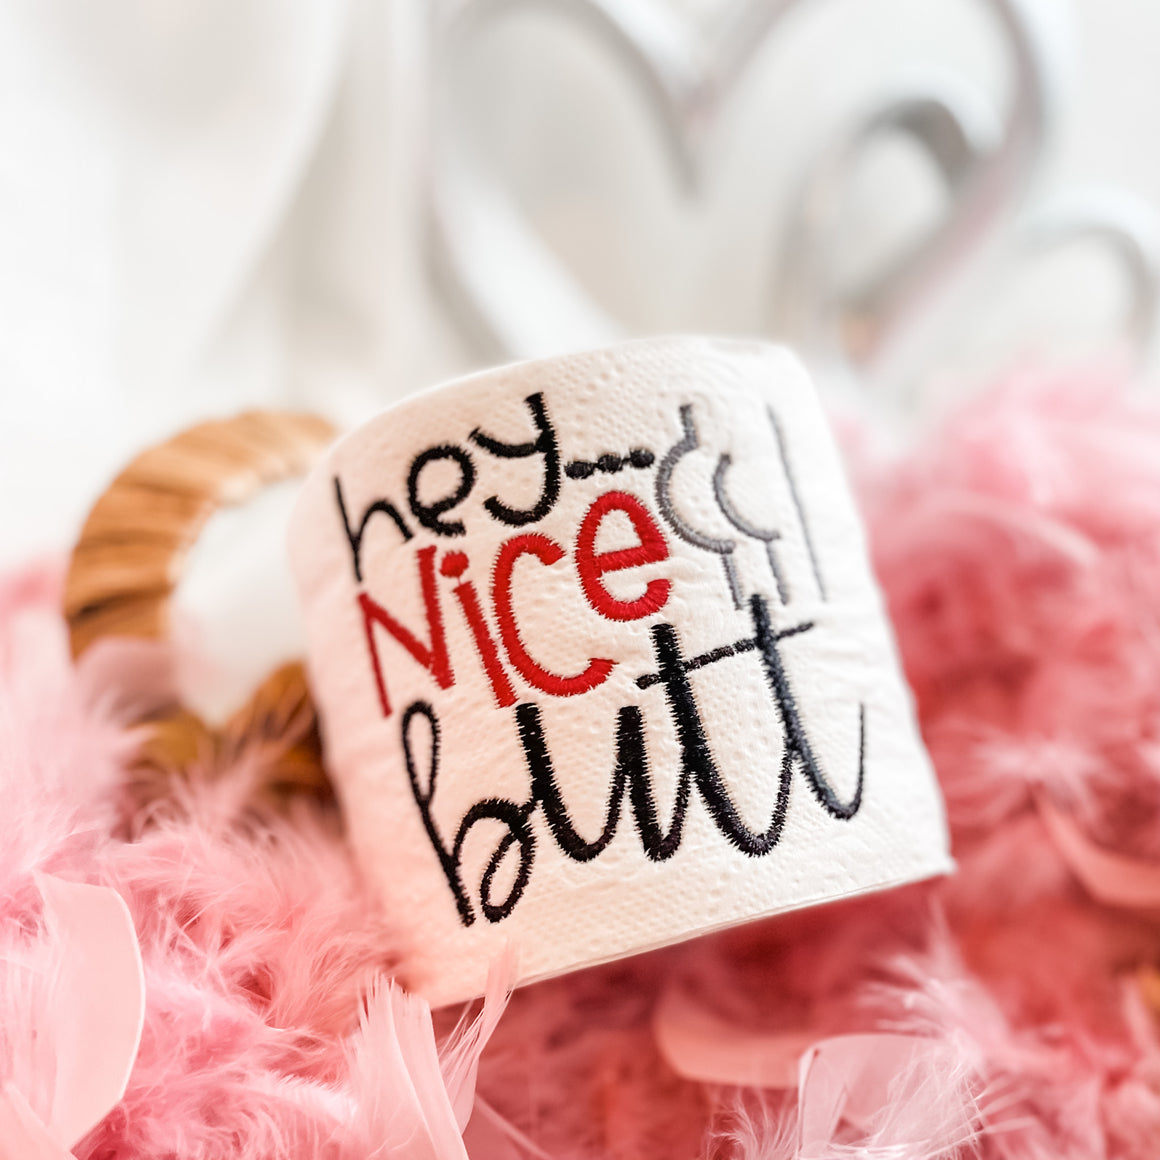 "Hey Nice Butt" Funny Paper 1st Anniversary Gift